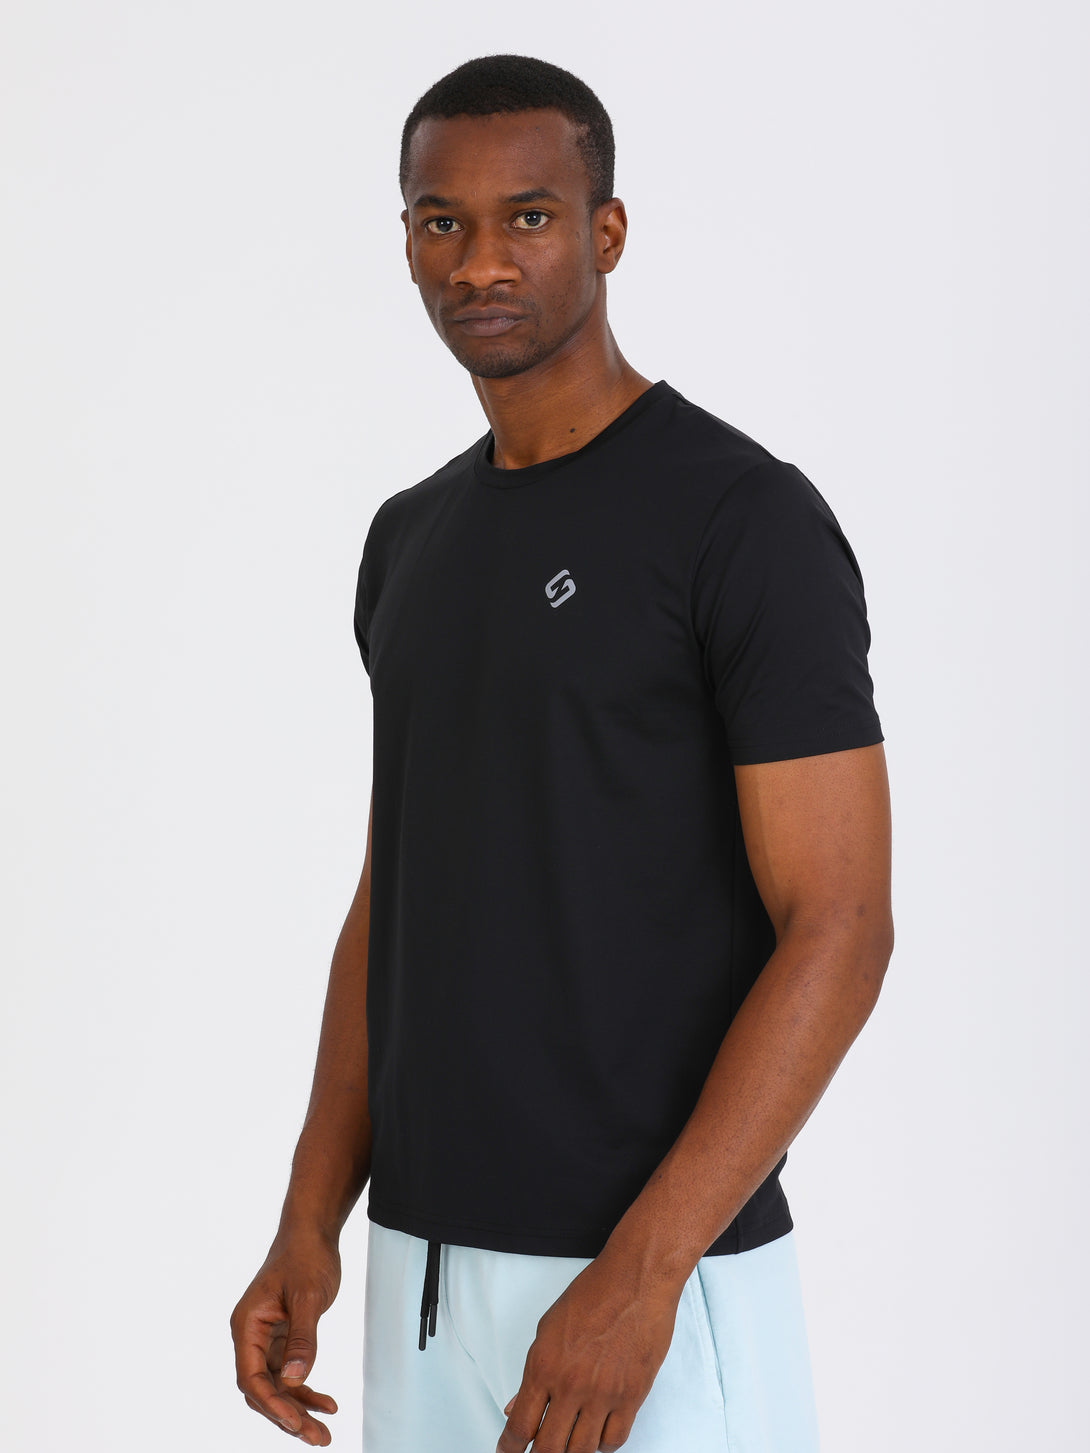 A Man Wearing Black Color Essential Workout T-Shirt